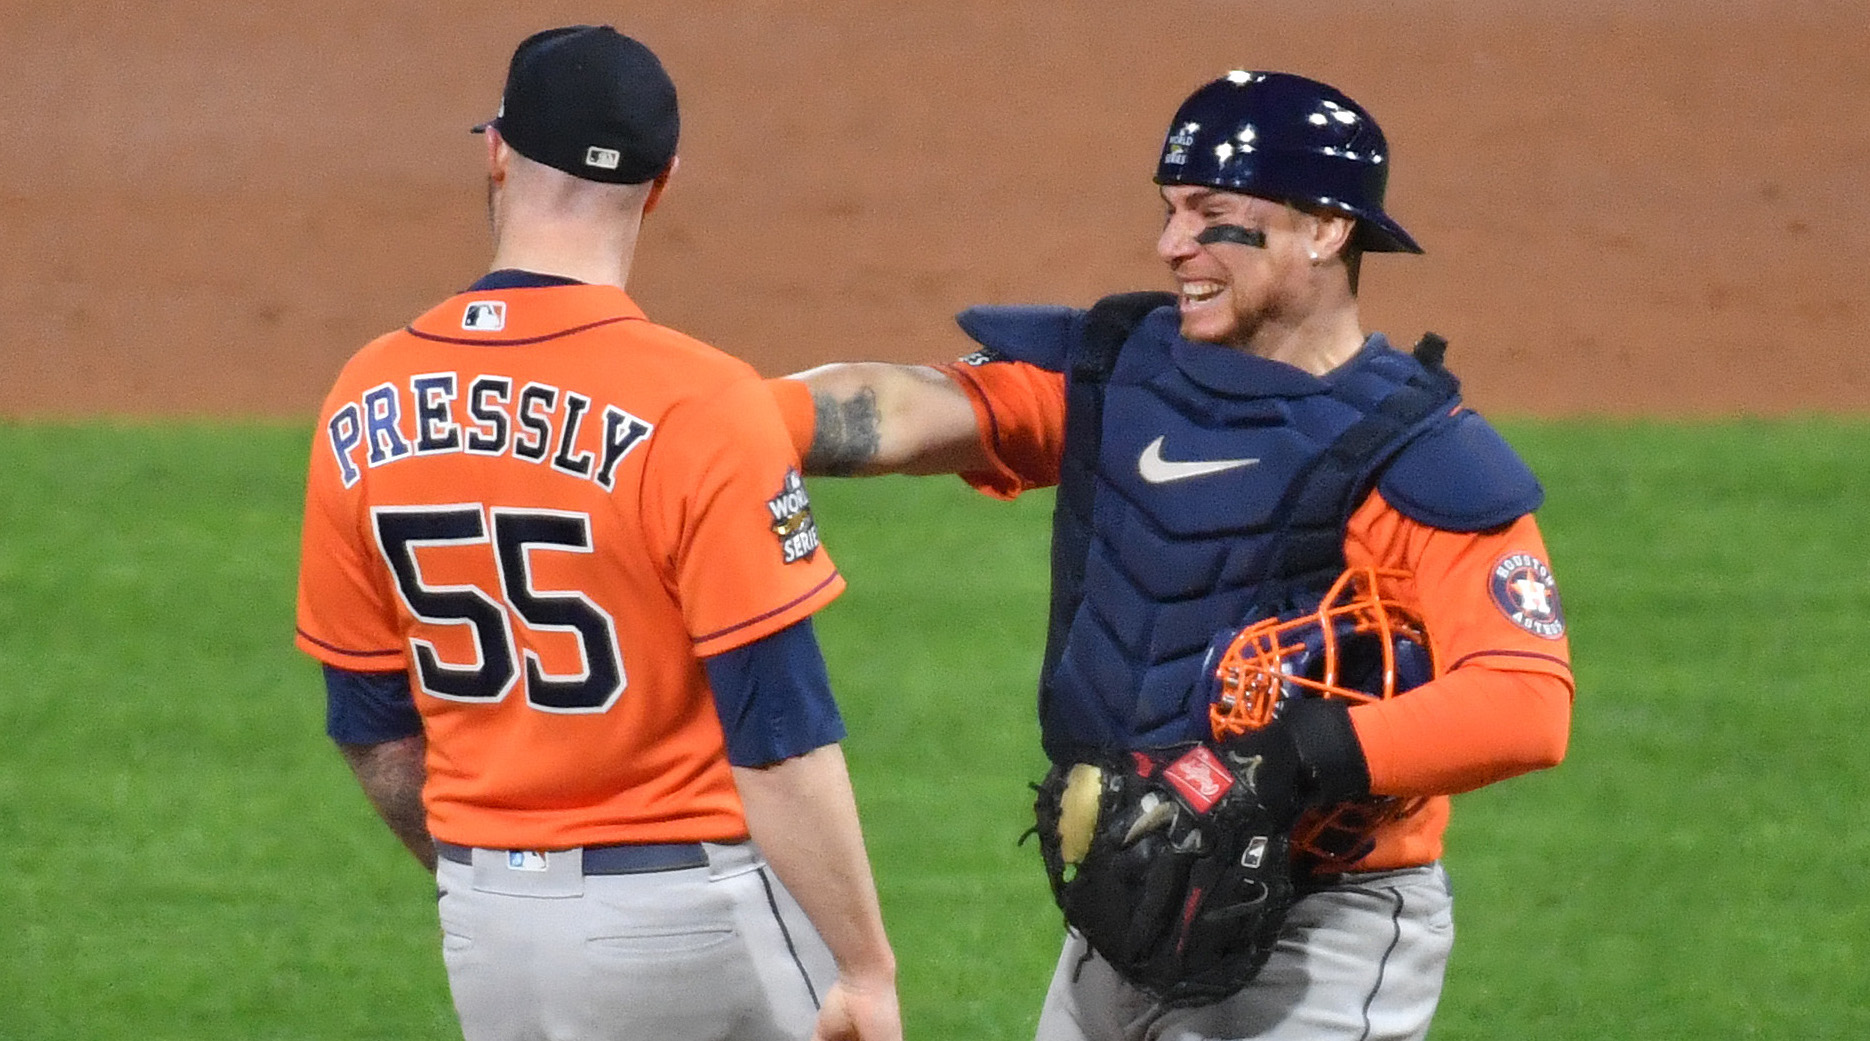 Astros pitcher Ryan Pressly celebrates with catcher Christian Vazquez after the final out of Game 4 of the 2022 World Series.